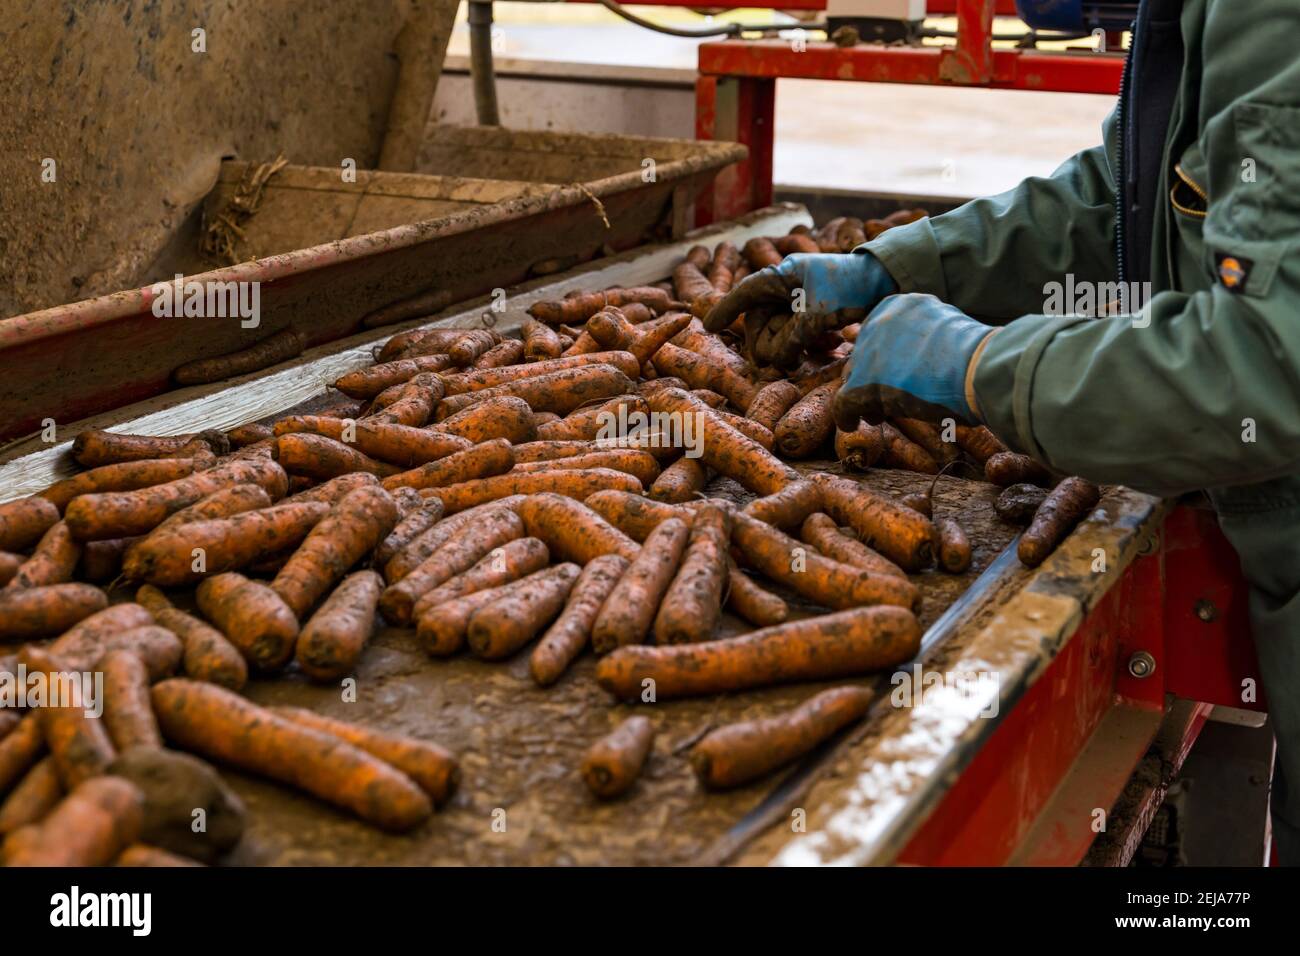 East Lothian, Scotland, UK, 22nd February 2021. Carrot harvest: Luffness Mains Farm harvests Nairobi carrots. Inside the sorting shed a farmworker removes clods of earth and deformed and broken carrots from the conveyor belt Stock Photo